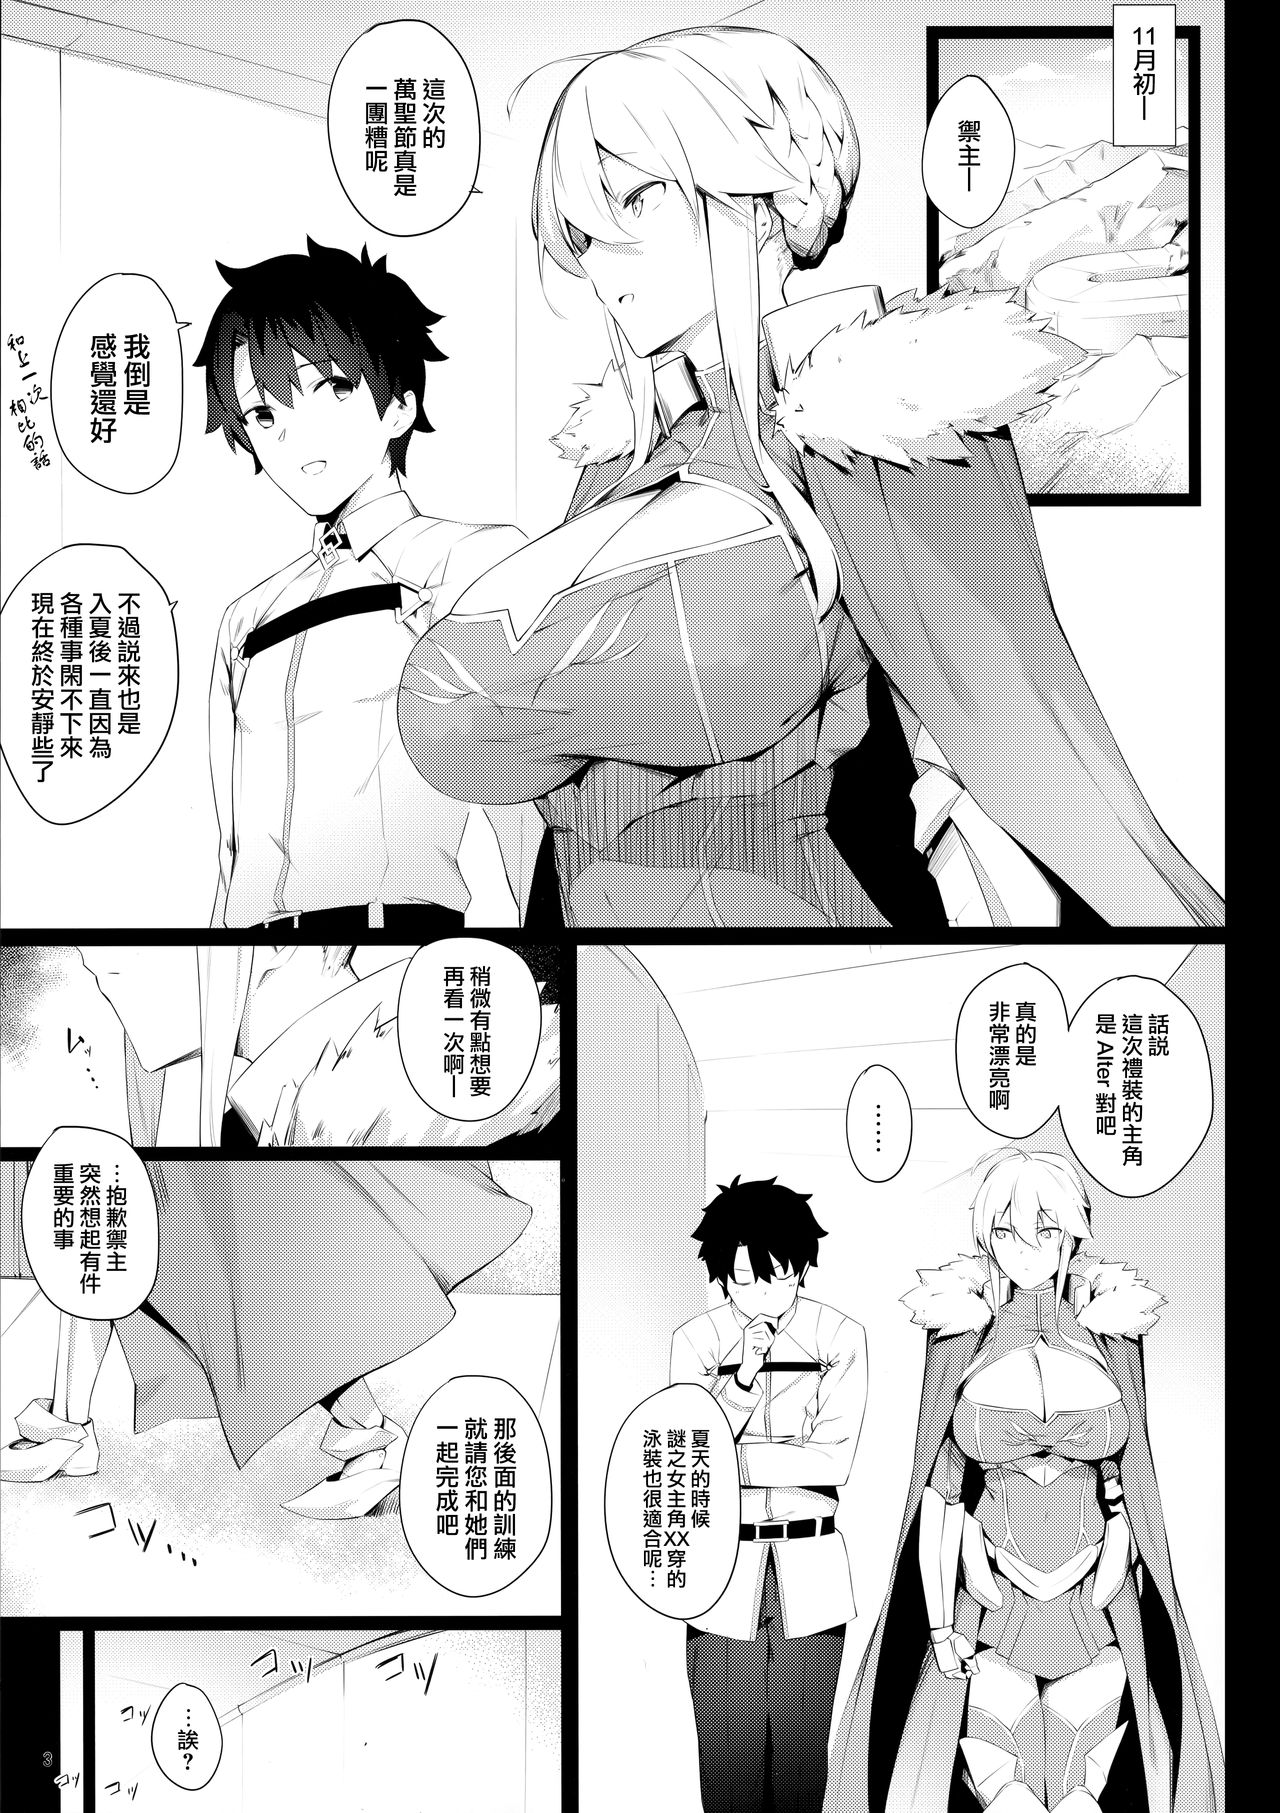 (C95) [Enokiya (eno)] Sultry Altria (Fate/Grand Order) [Chinese] [无毒汉化组] page 3 full